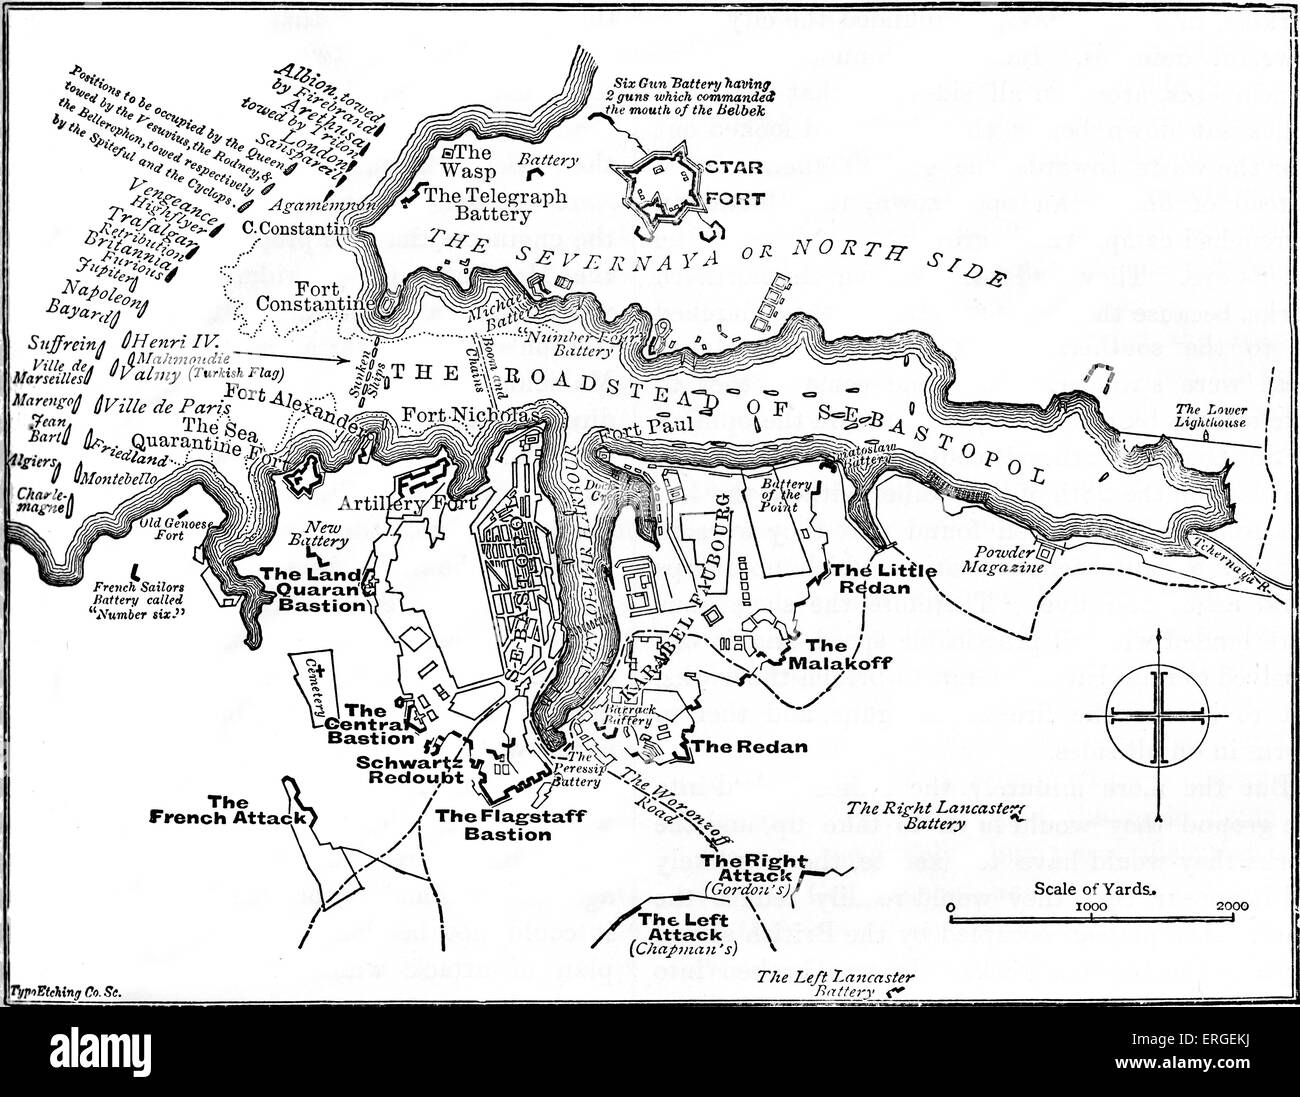 19th century crimea map Black and White Stock Photos & Images - Alamy